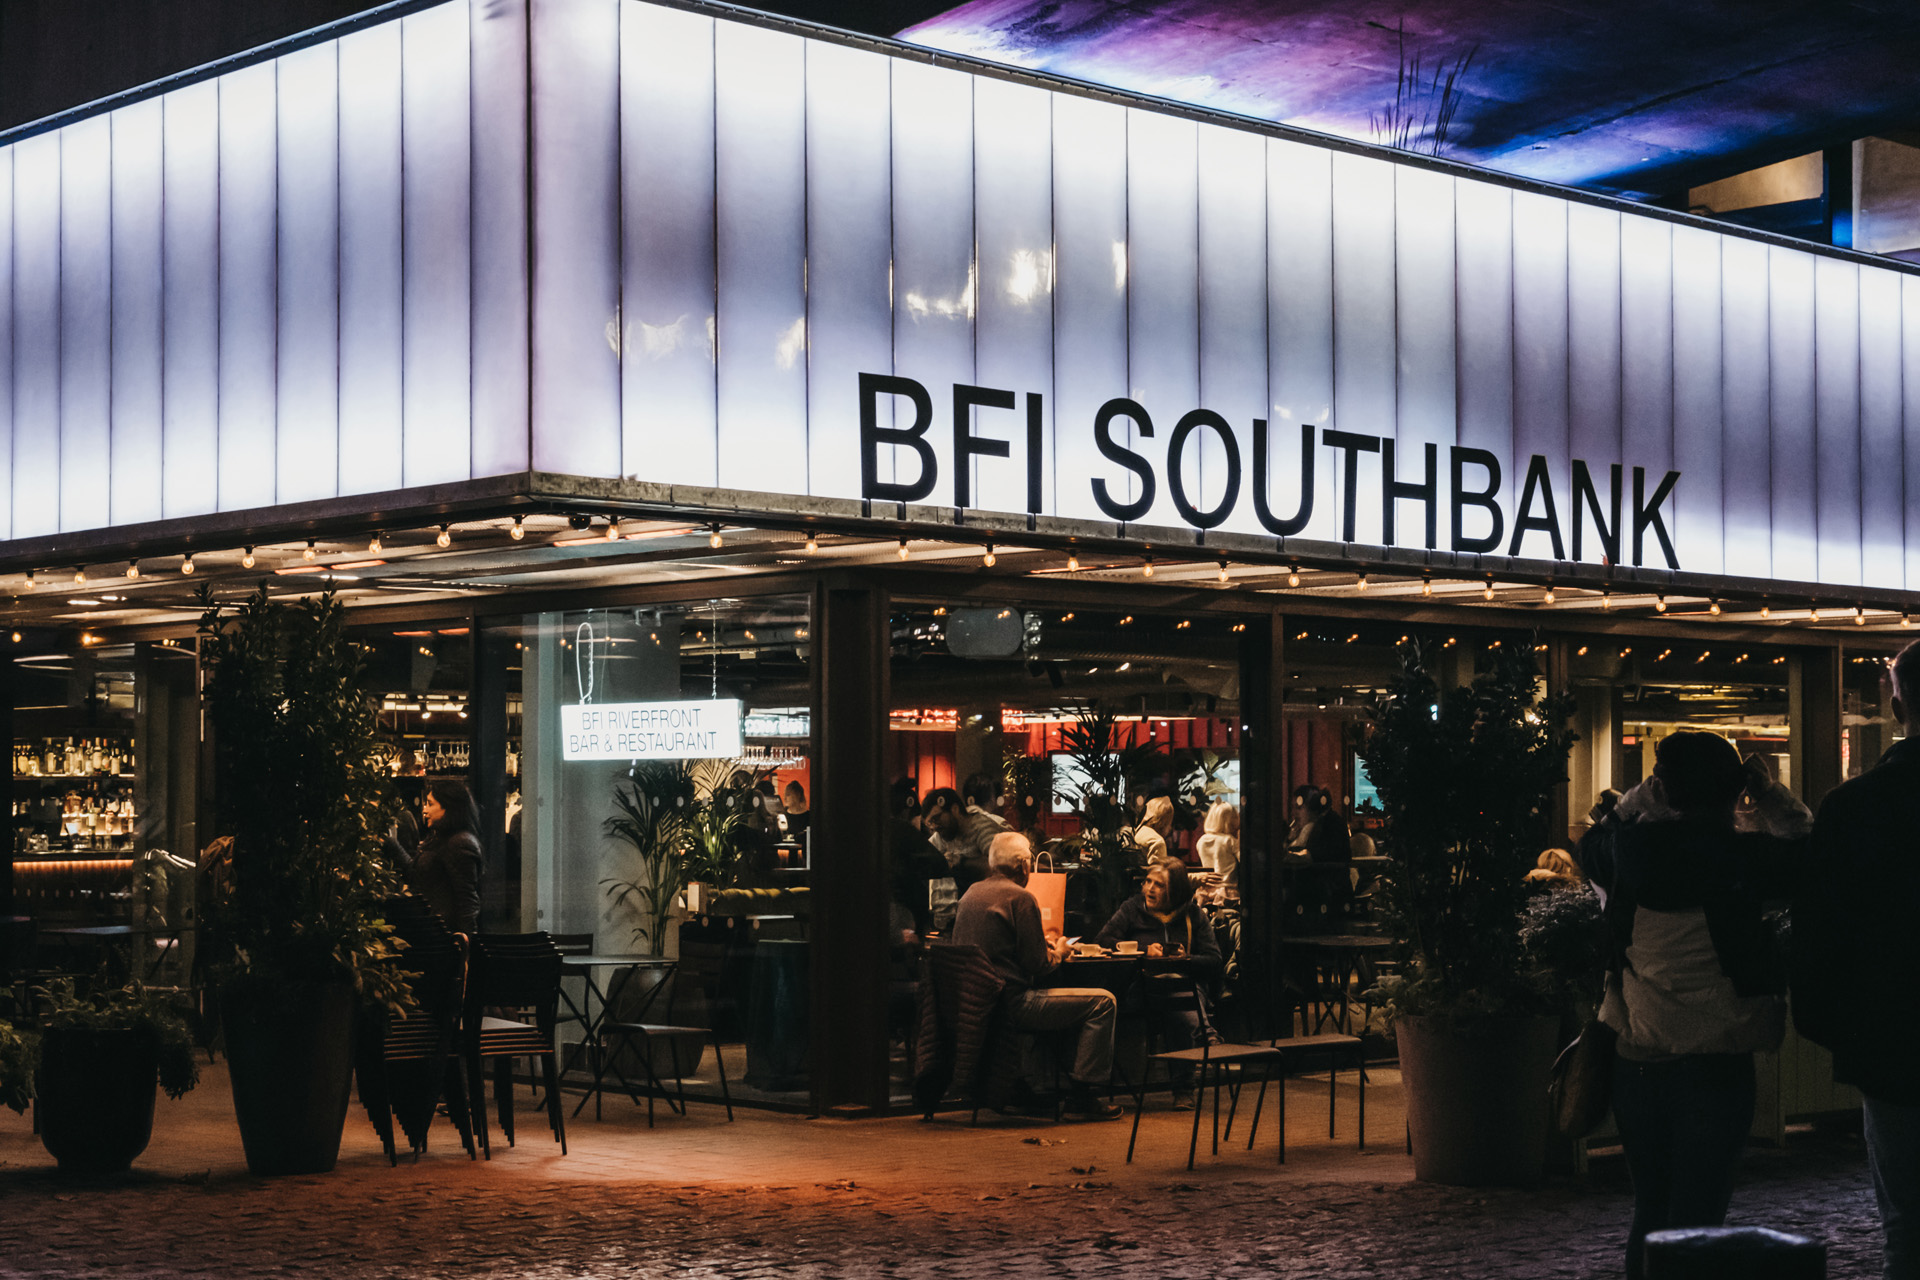 Facade of BFI Southbank, the leading repertory cinema in the London, UK.